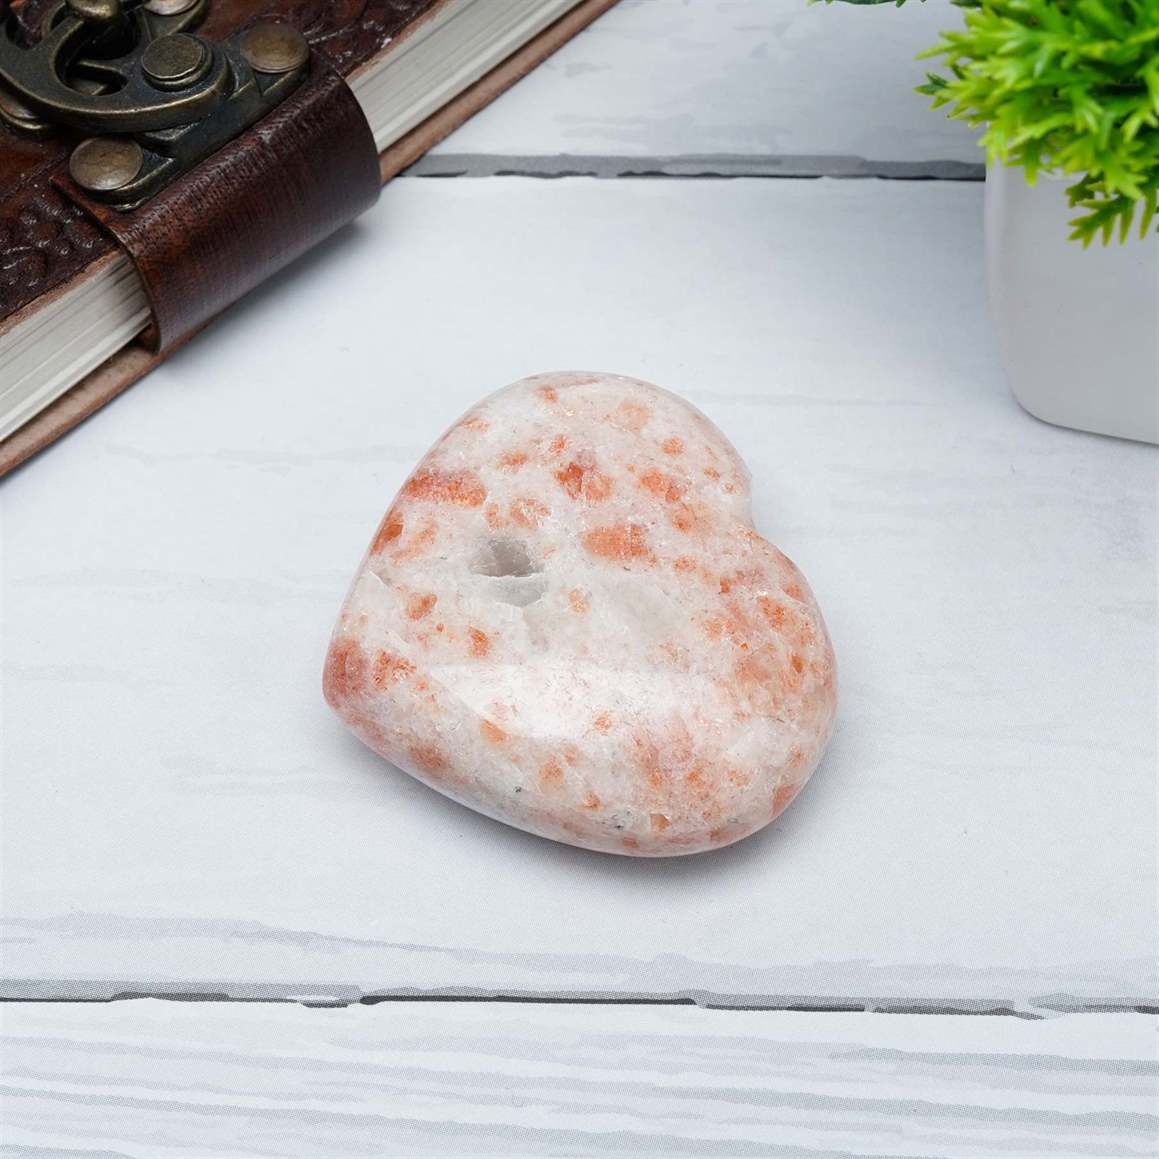 Sunstone Crystal Heart Shape Stone - Personal Power and Positivity - TheIndianHand